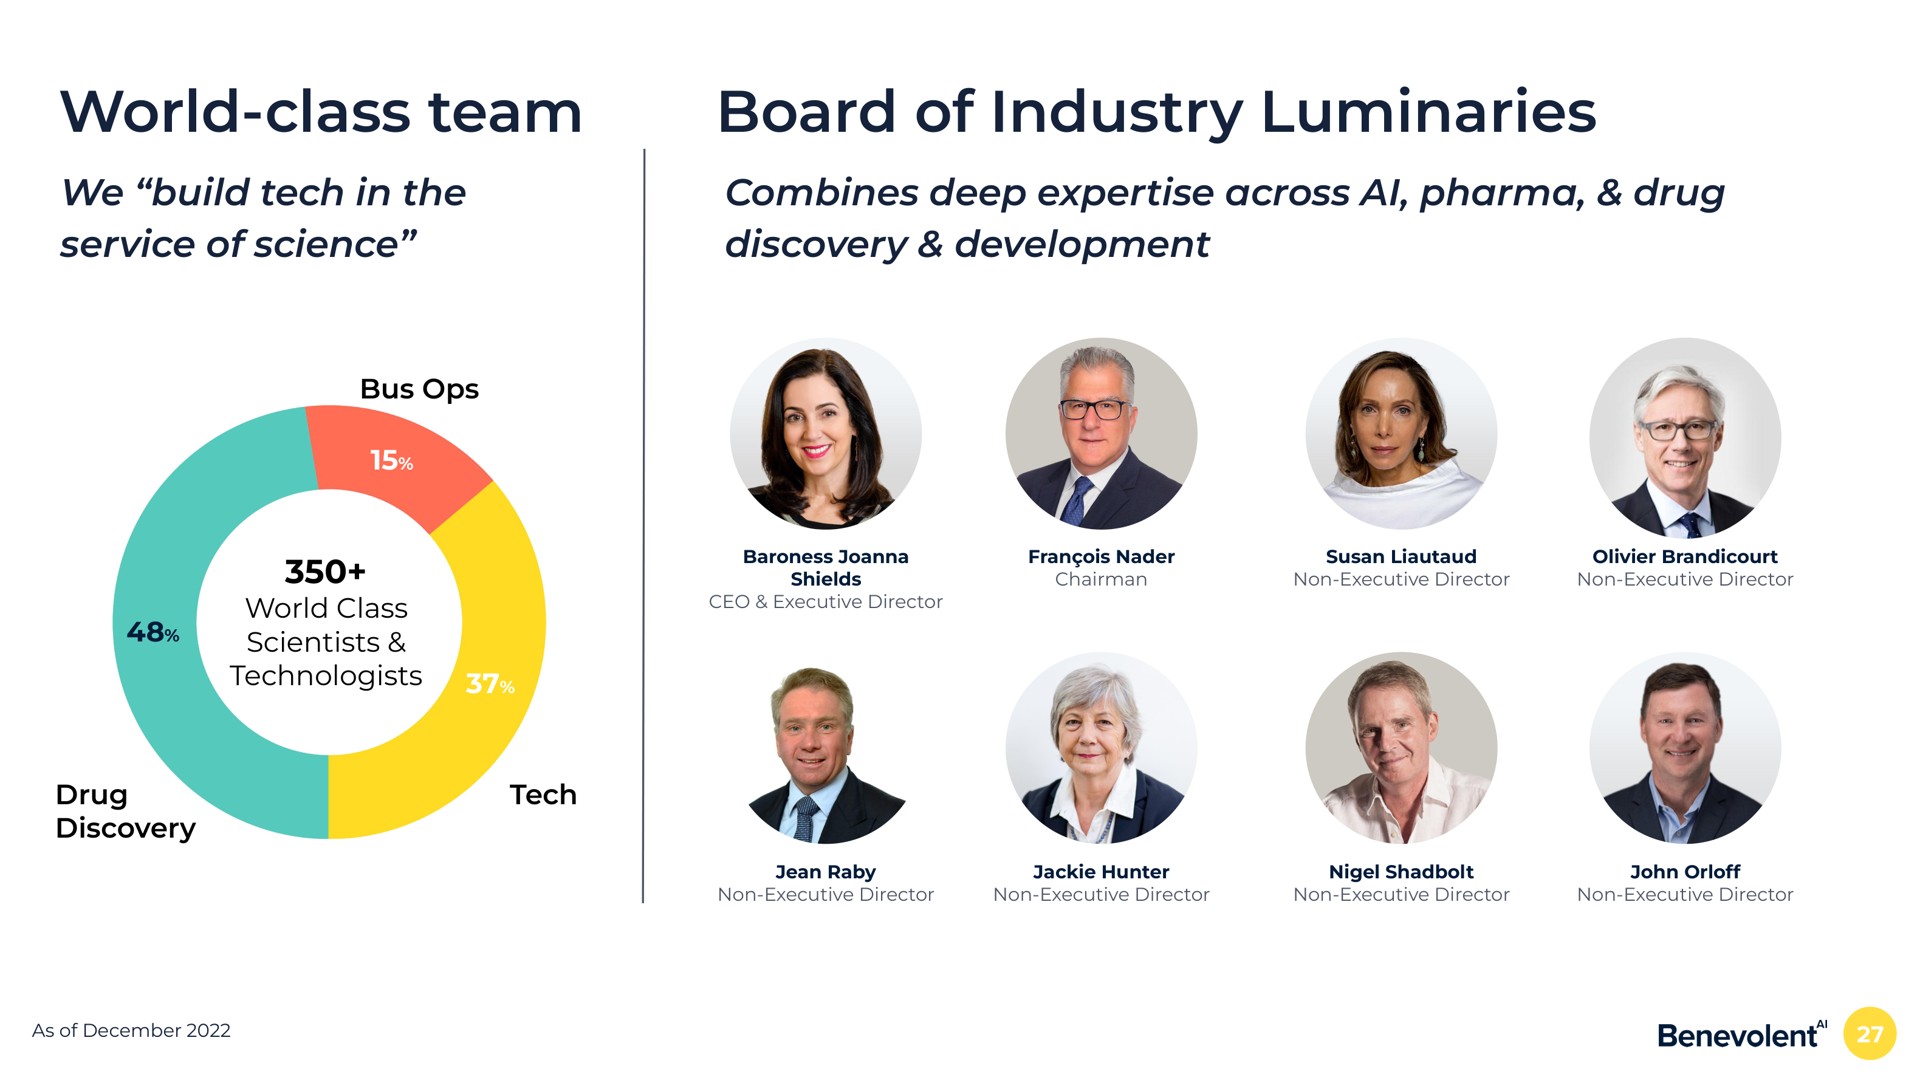 world class team board of industry luminaries we build tech in the service of science combines deep across drug discovery development bus world class scientists technologists drug discovery tech a | BenevolentAI